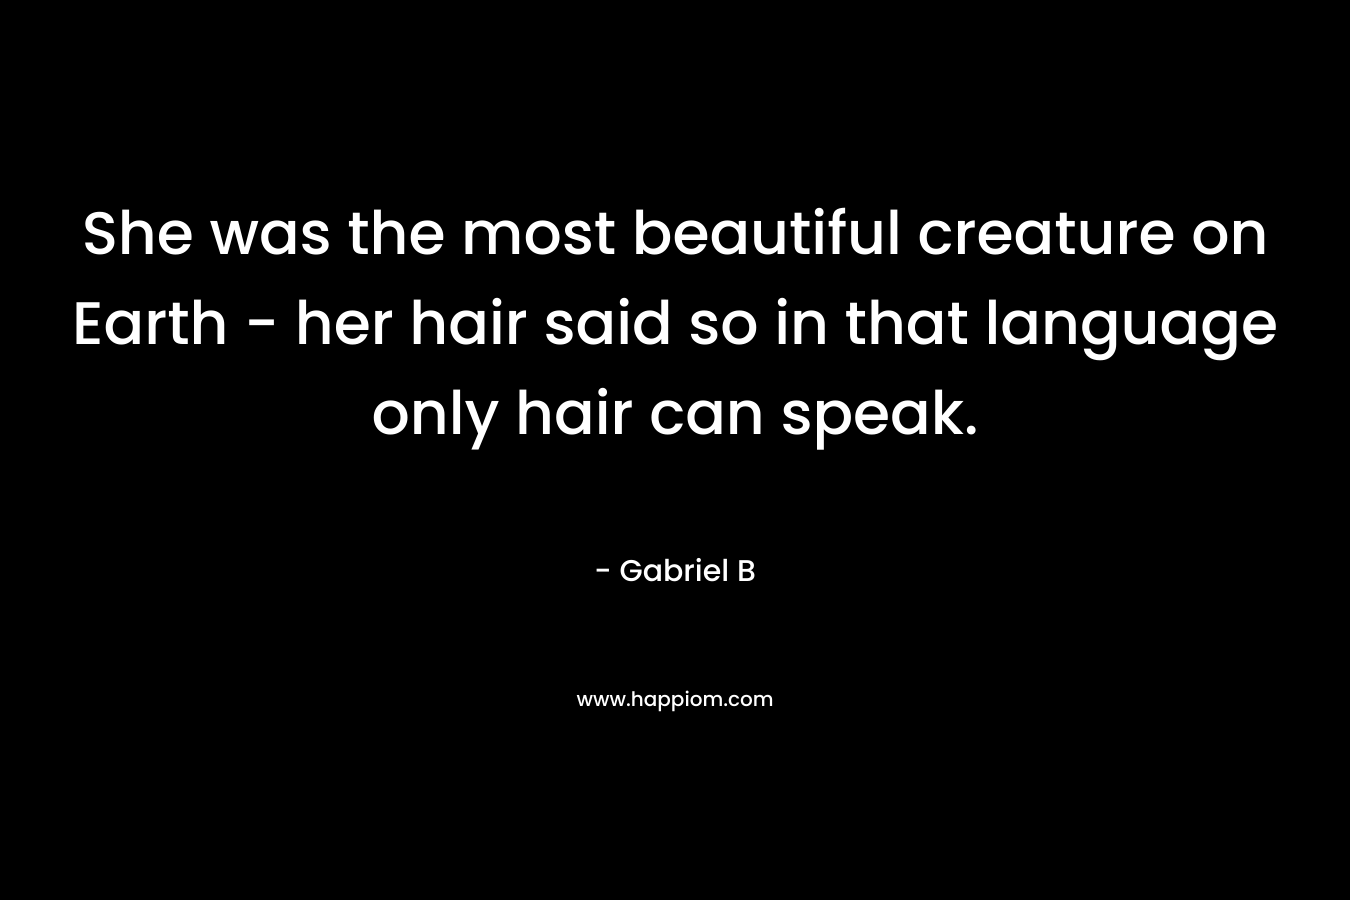 She was the most beautiful creature on Earth - her hair said so in that language only hair can speak.